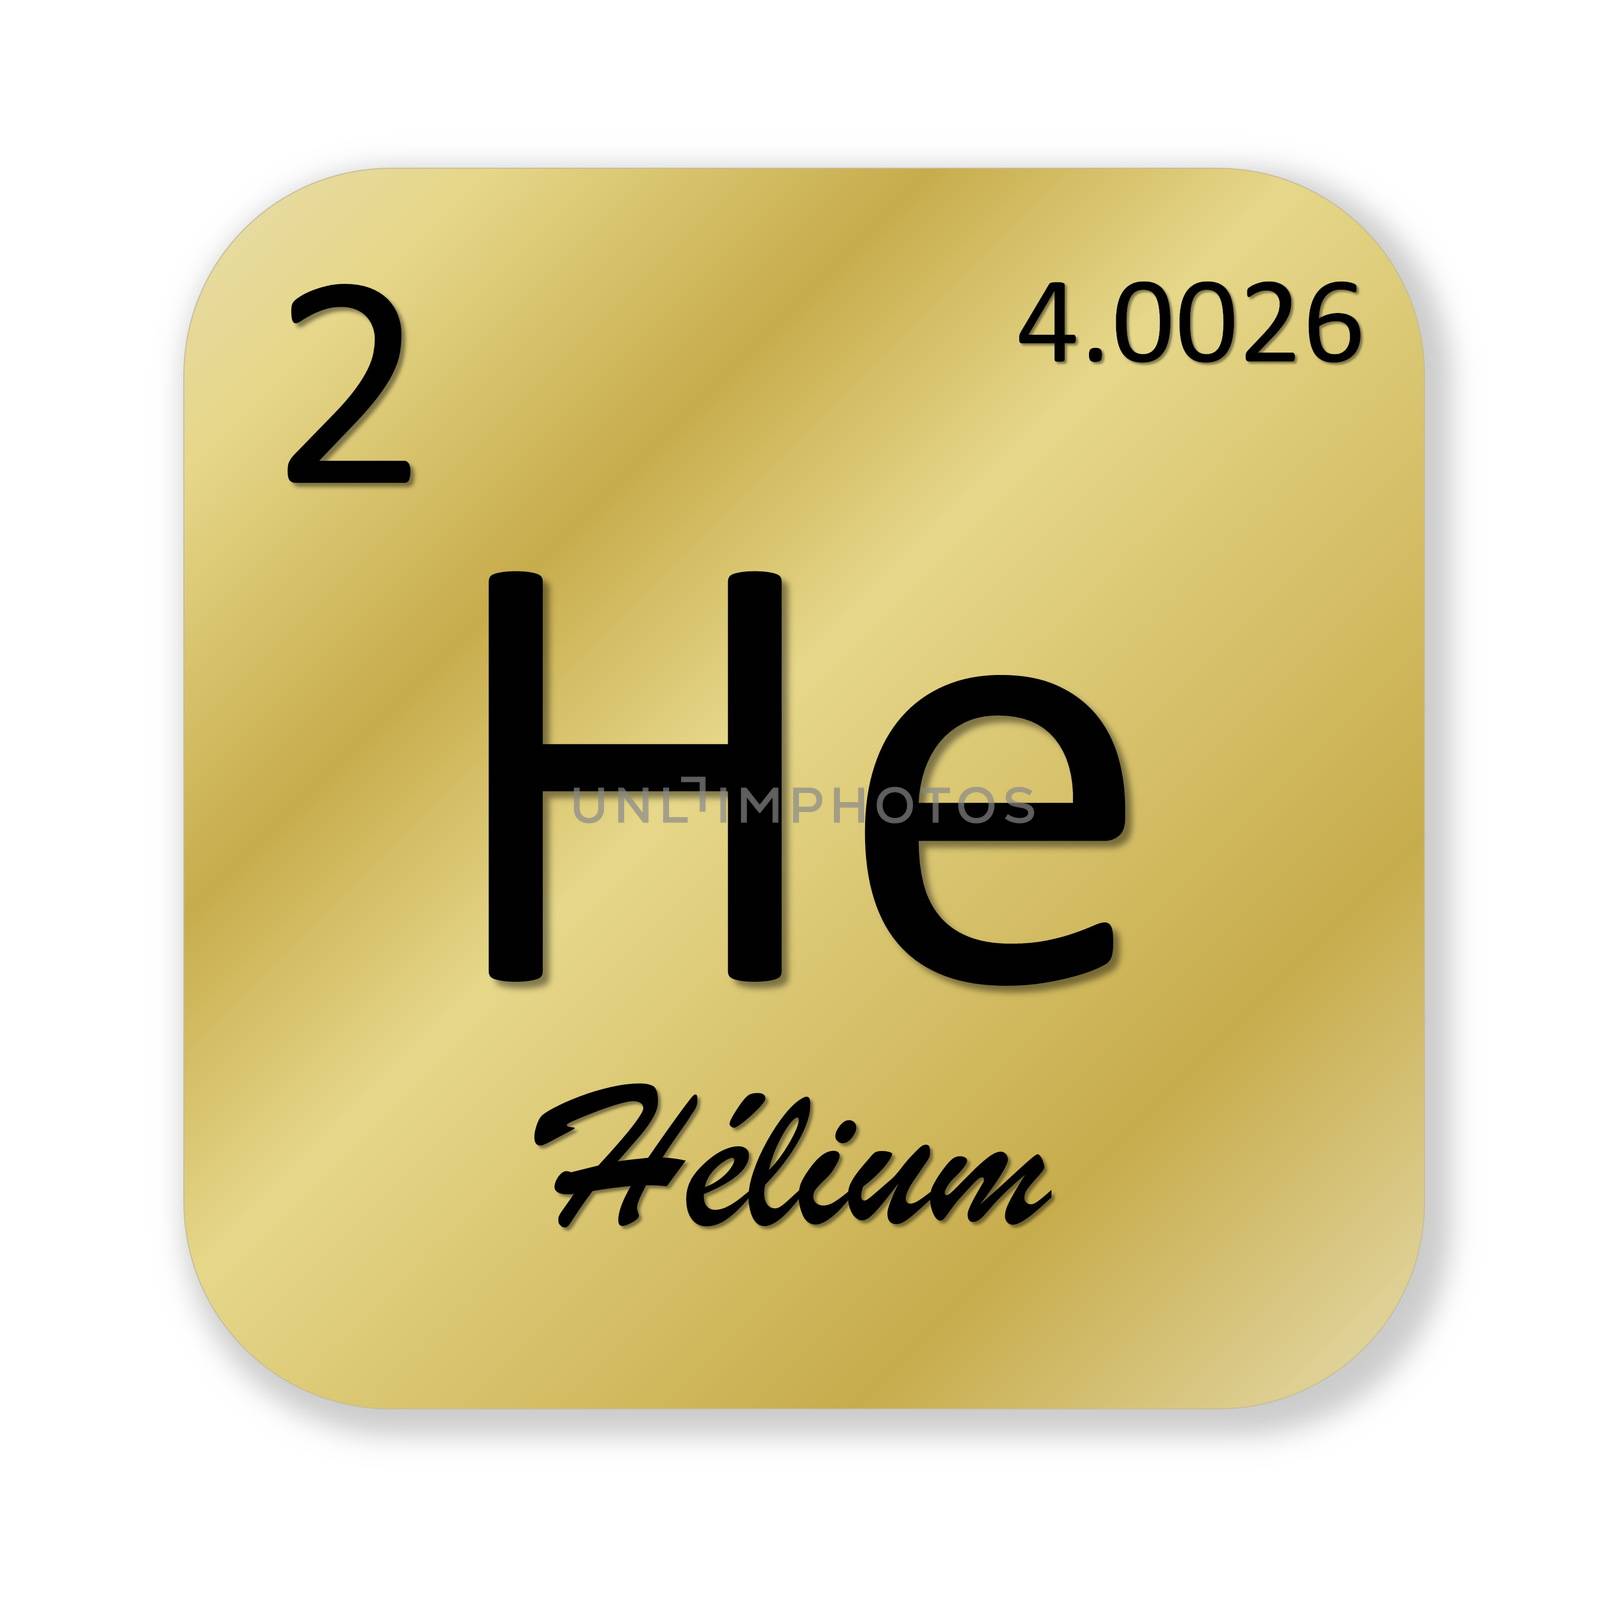 Black helium element, french, into golden square shape isolated in white background